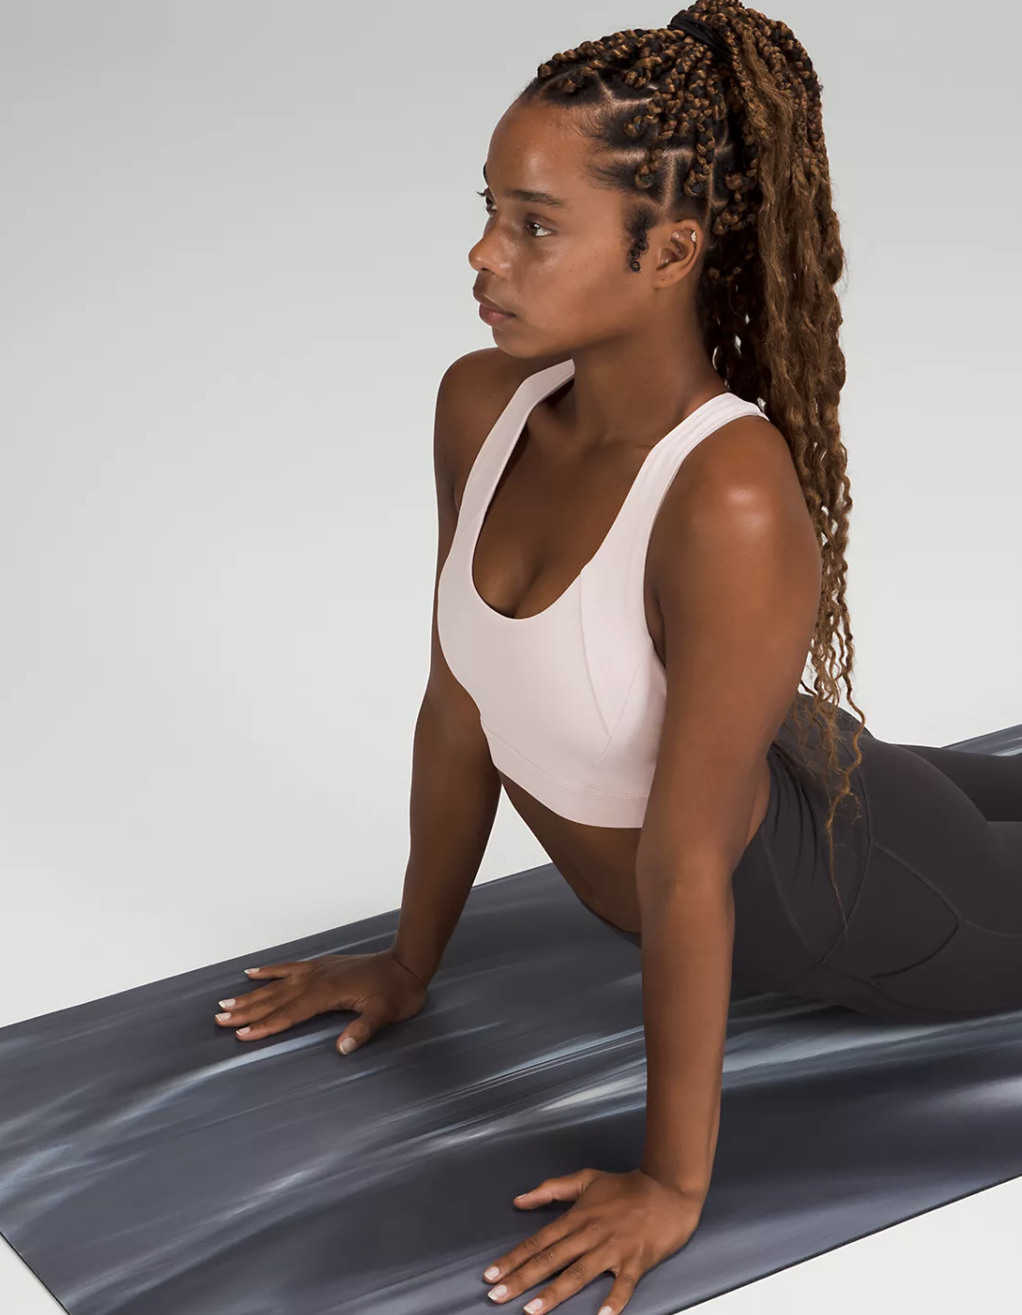 A person doing a yoga pose on the yoga mat